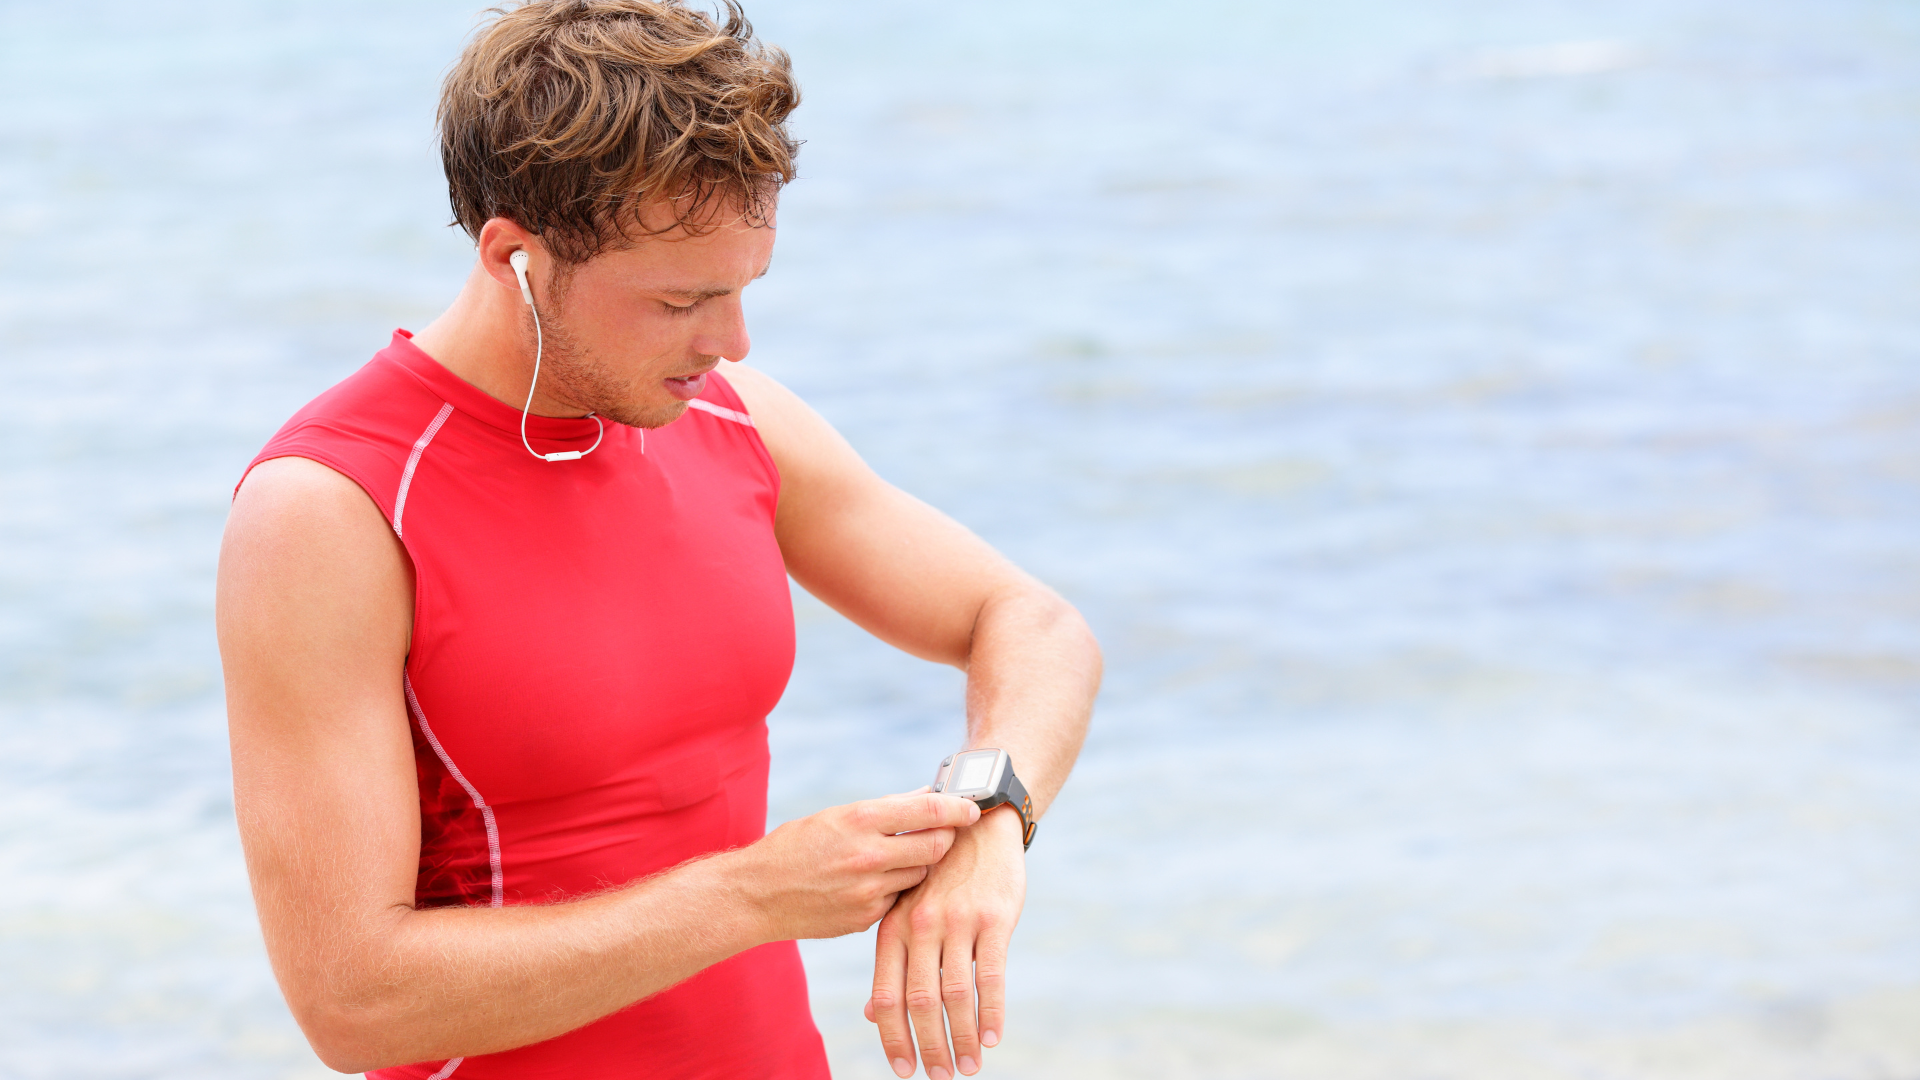 A man taking his pulse while exercising on the beach.